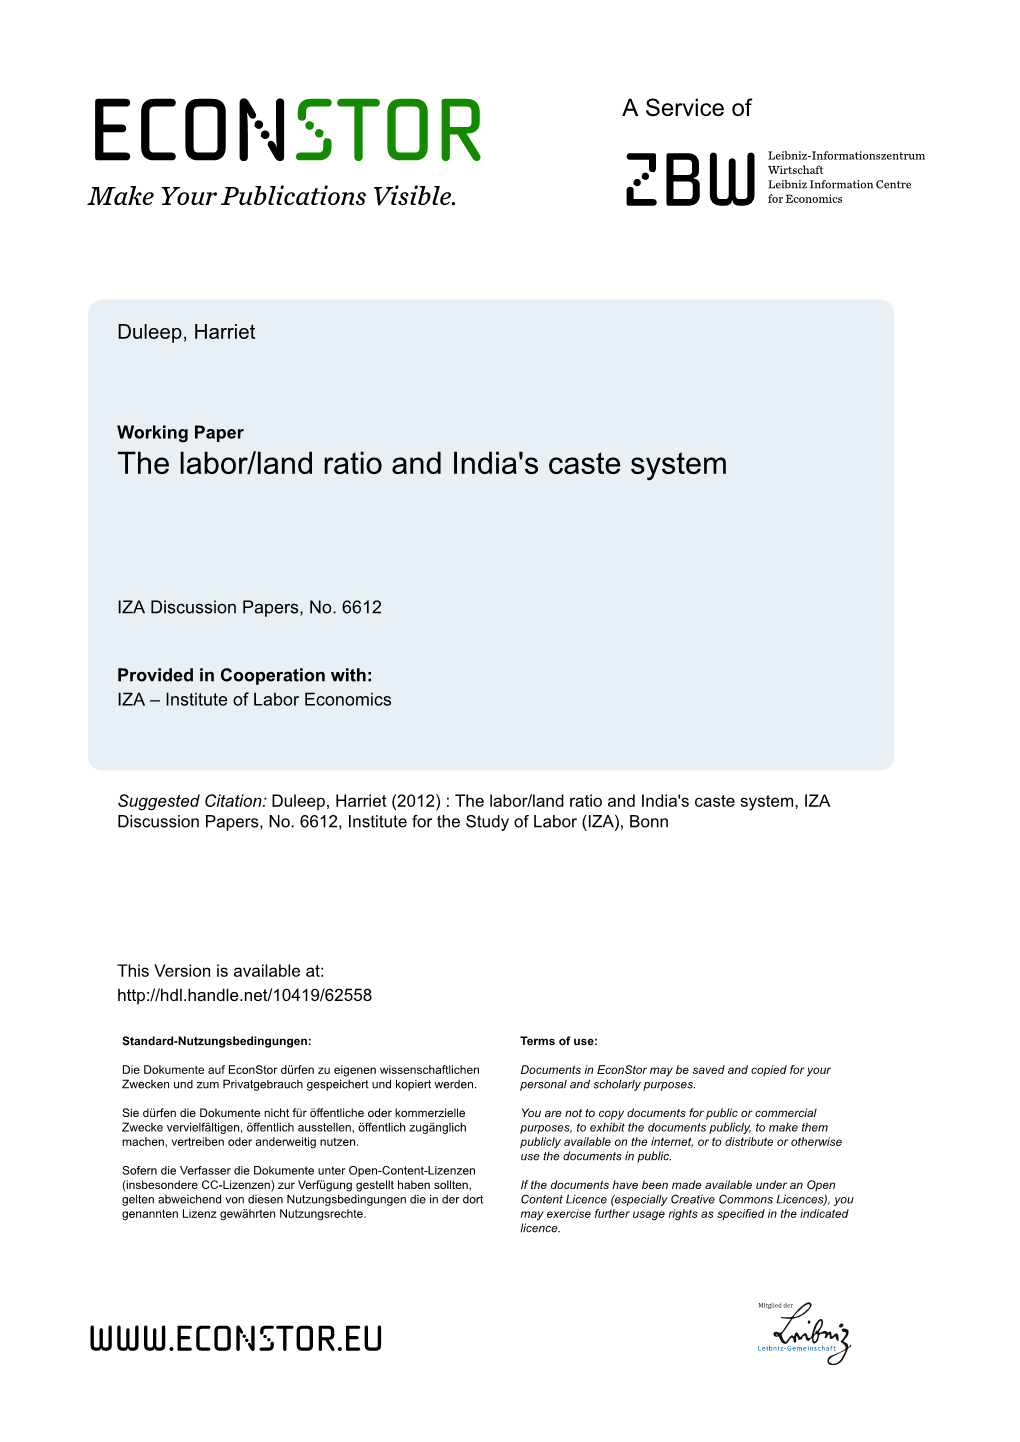 The Labor/Land Ratio and India's Caste System